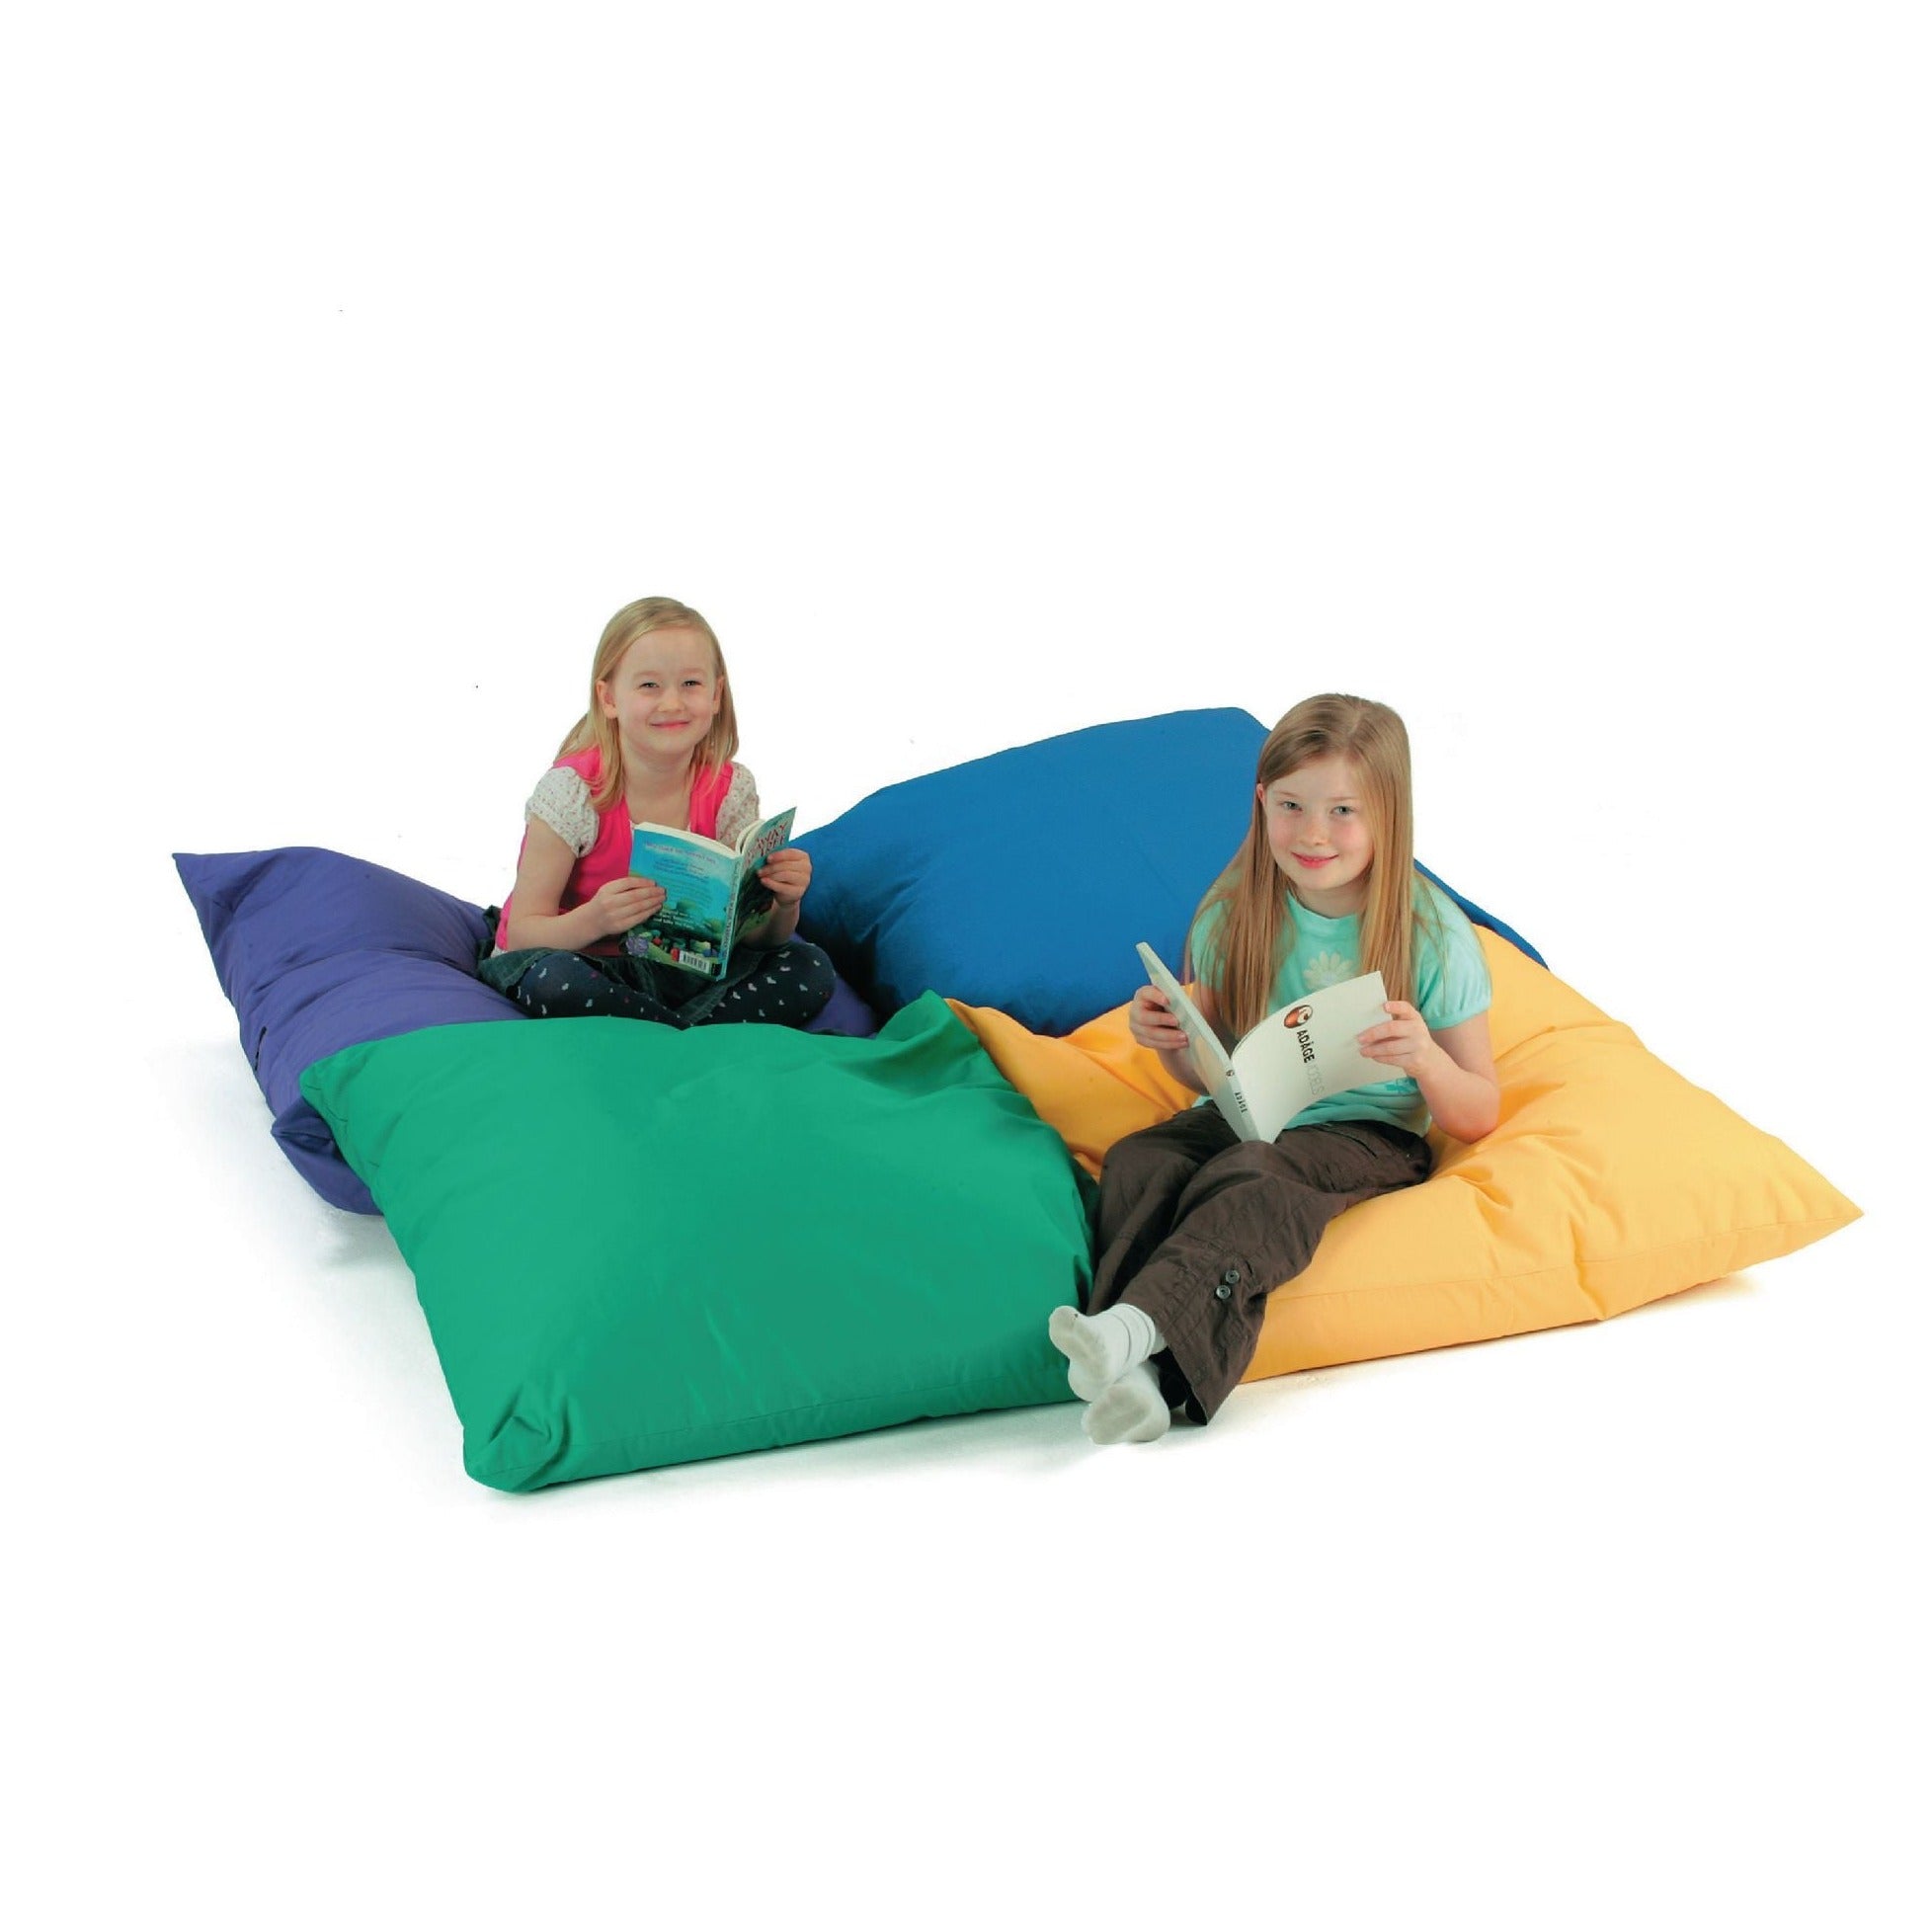 Plain Cushion Large Pack of 4, The large cushions come as a pack of 4, 1 of each of blue, red, green and yellow. The bright and vibrant colours make these the perfect addition to any sensory room,classroom or Early years setting. Children will be drawn to the bold colours and enjoy sitting in comfort on the Plain Cushion Large Pack of 4. Each cushion filling is flame retardant to BS5852 ignition sources 0 and 1 and all are machine washable at 30ºC and can be cool tumble dried. Large Size: 1000mm². Machine w